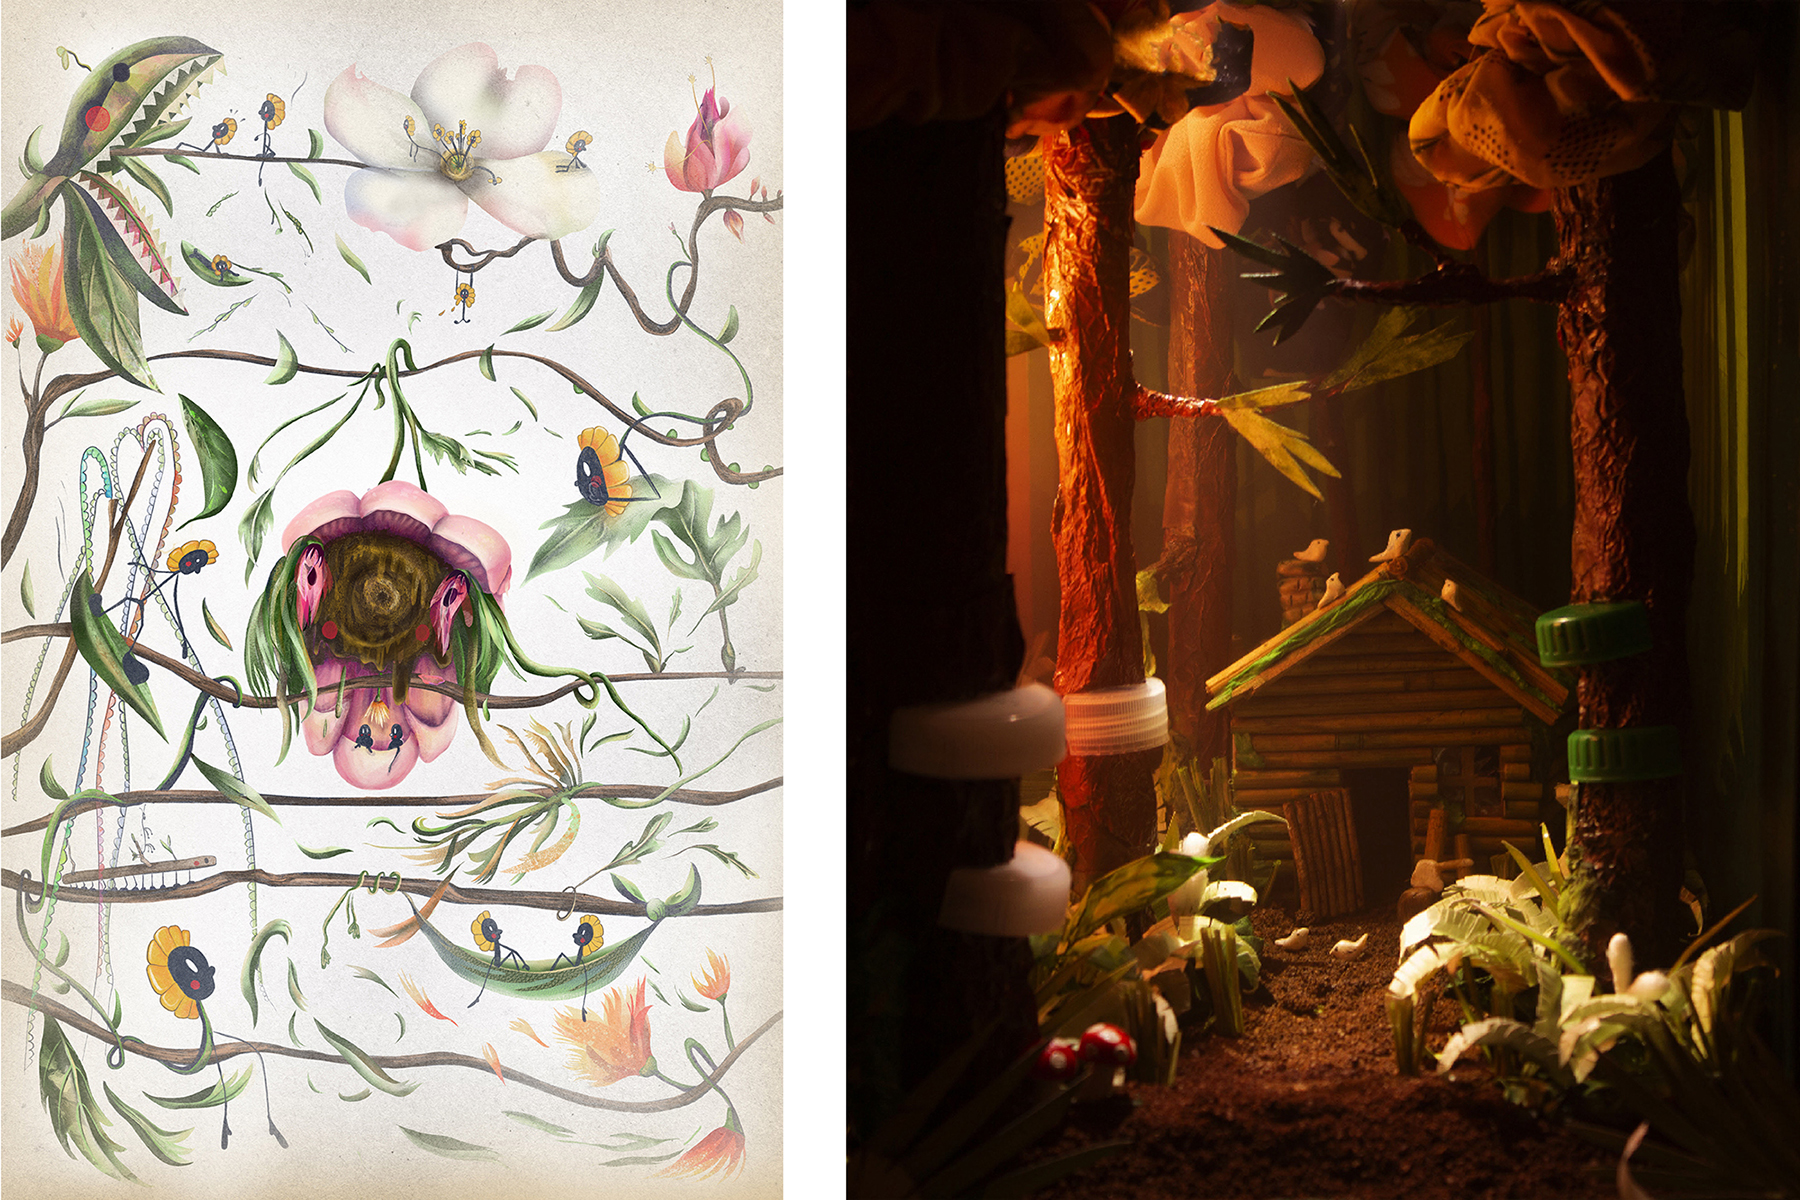 A side-by-side of two illustrations, one featuring flowers hanging on branches and the other of a diorama of a forest environment.